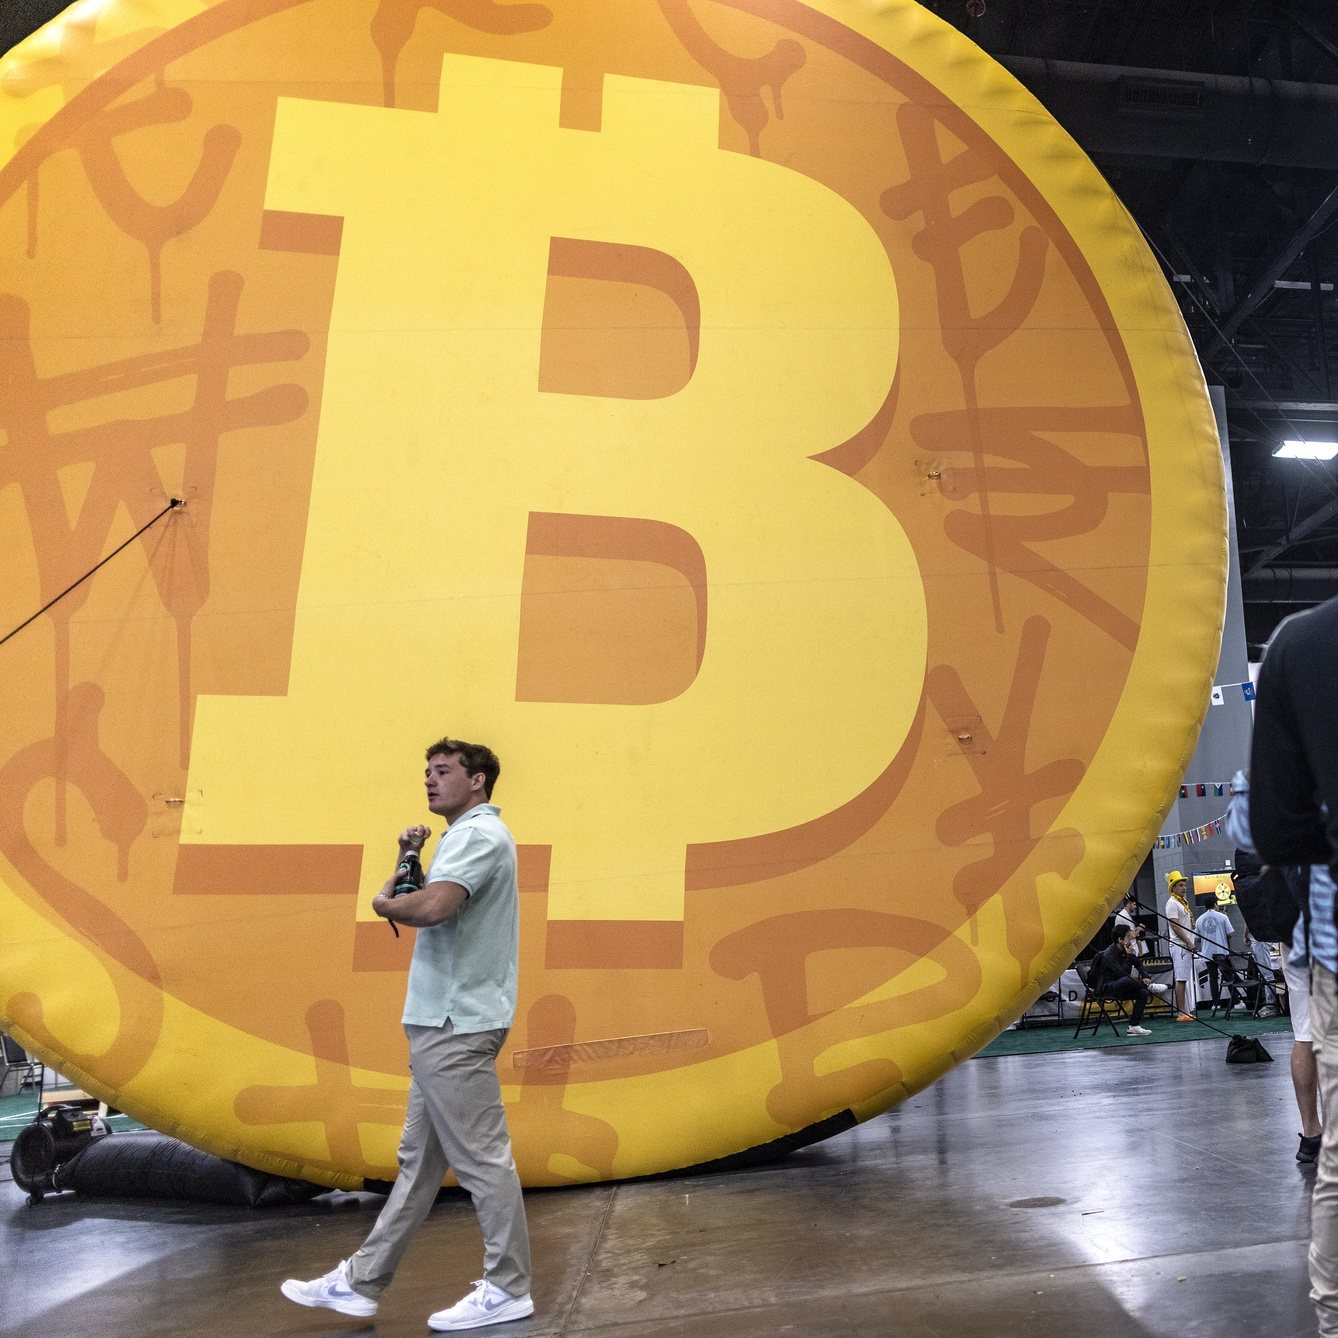 epa10637199 People attend the Bitcoin 2023 conference at the Miami Beach Convention Center in Miami Beach, Florida, USA, 18 May 2023. Bitcoin 2023 is the biggest bitcoin event in the world that features, for its 2023 edition, about 150 speakers and a showcase of more than 2,000 companies.  EPA/CRISTOBAL HERRERA-ULASHKEVICH